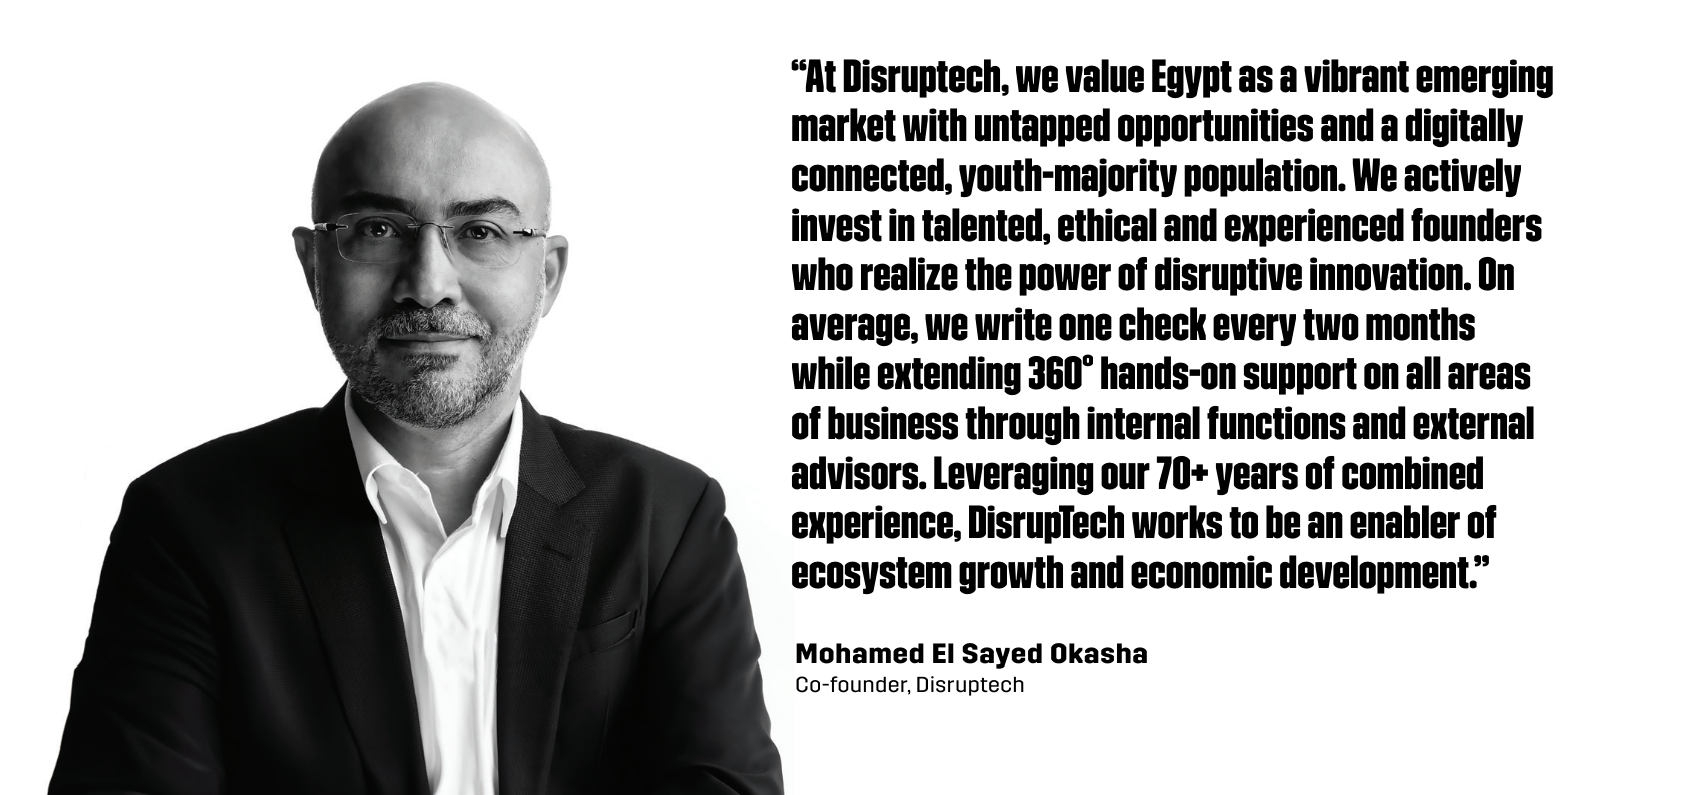 “At Disruptech, we value Egypt as a vibrant emerging market with untapped opportunities and a digitally connected, youth-majority population. We actively invest in talented, ethical and experienced founders who realize the power of disruptive innovation. On average, we write one check every two months while extending 360° hands-on support on all areas of business through internal functions and external advisors. Leveraging our 70+ years of combined experience, DisrupTech works to be an enabler of ecosystem growth and economic development.” - Mohamed El Sayed Okasha, Co-founder of Disruptech